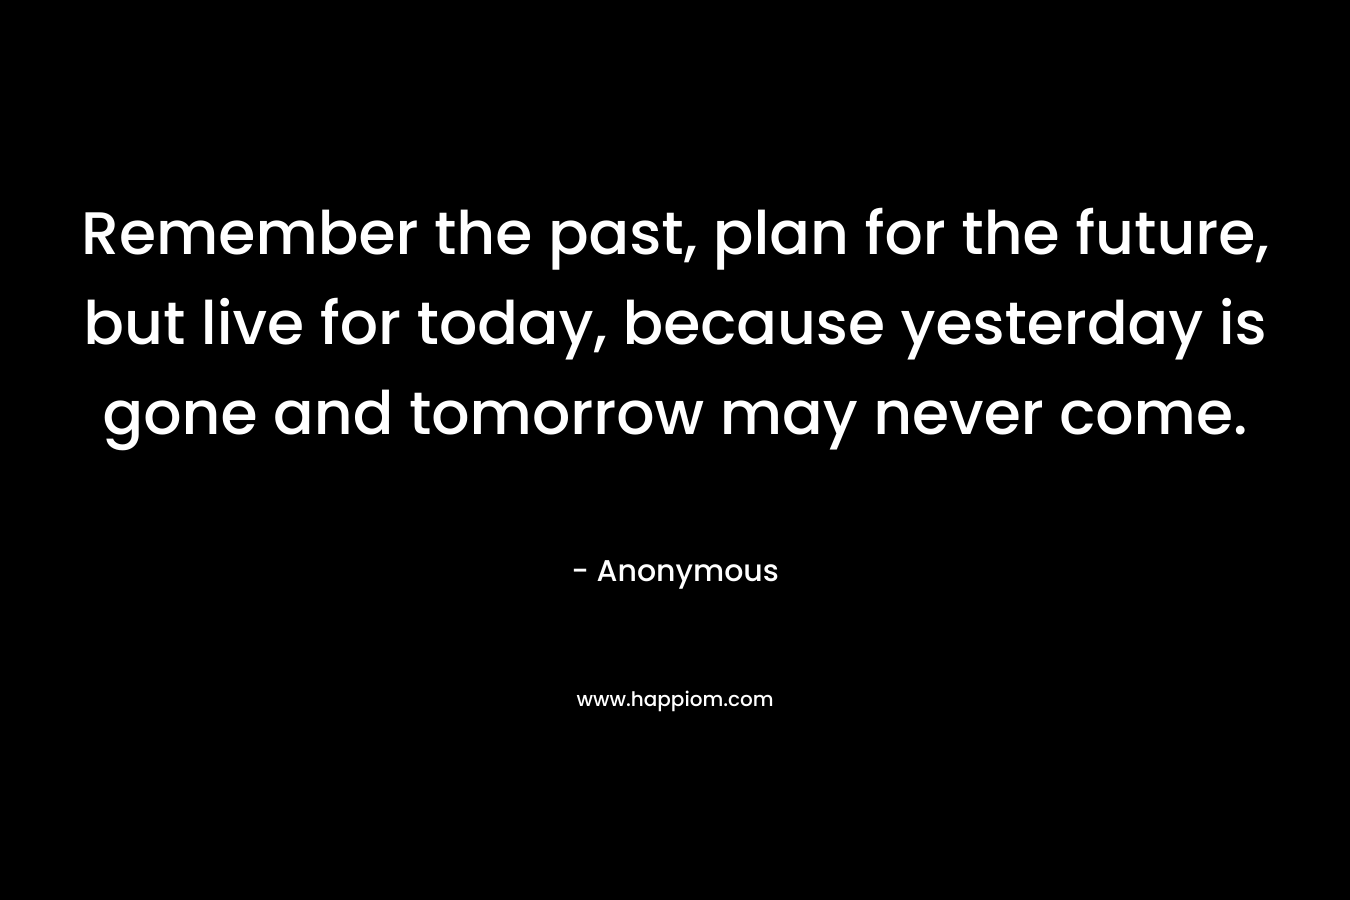 Remember the past, plan for the future, but live for today, because yesterday is gone and tomorrow may never come.